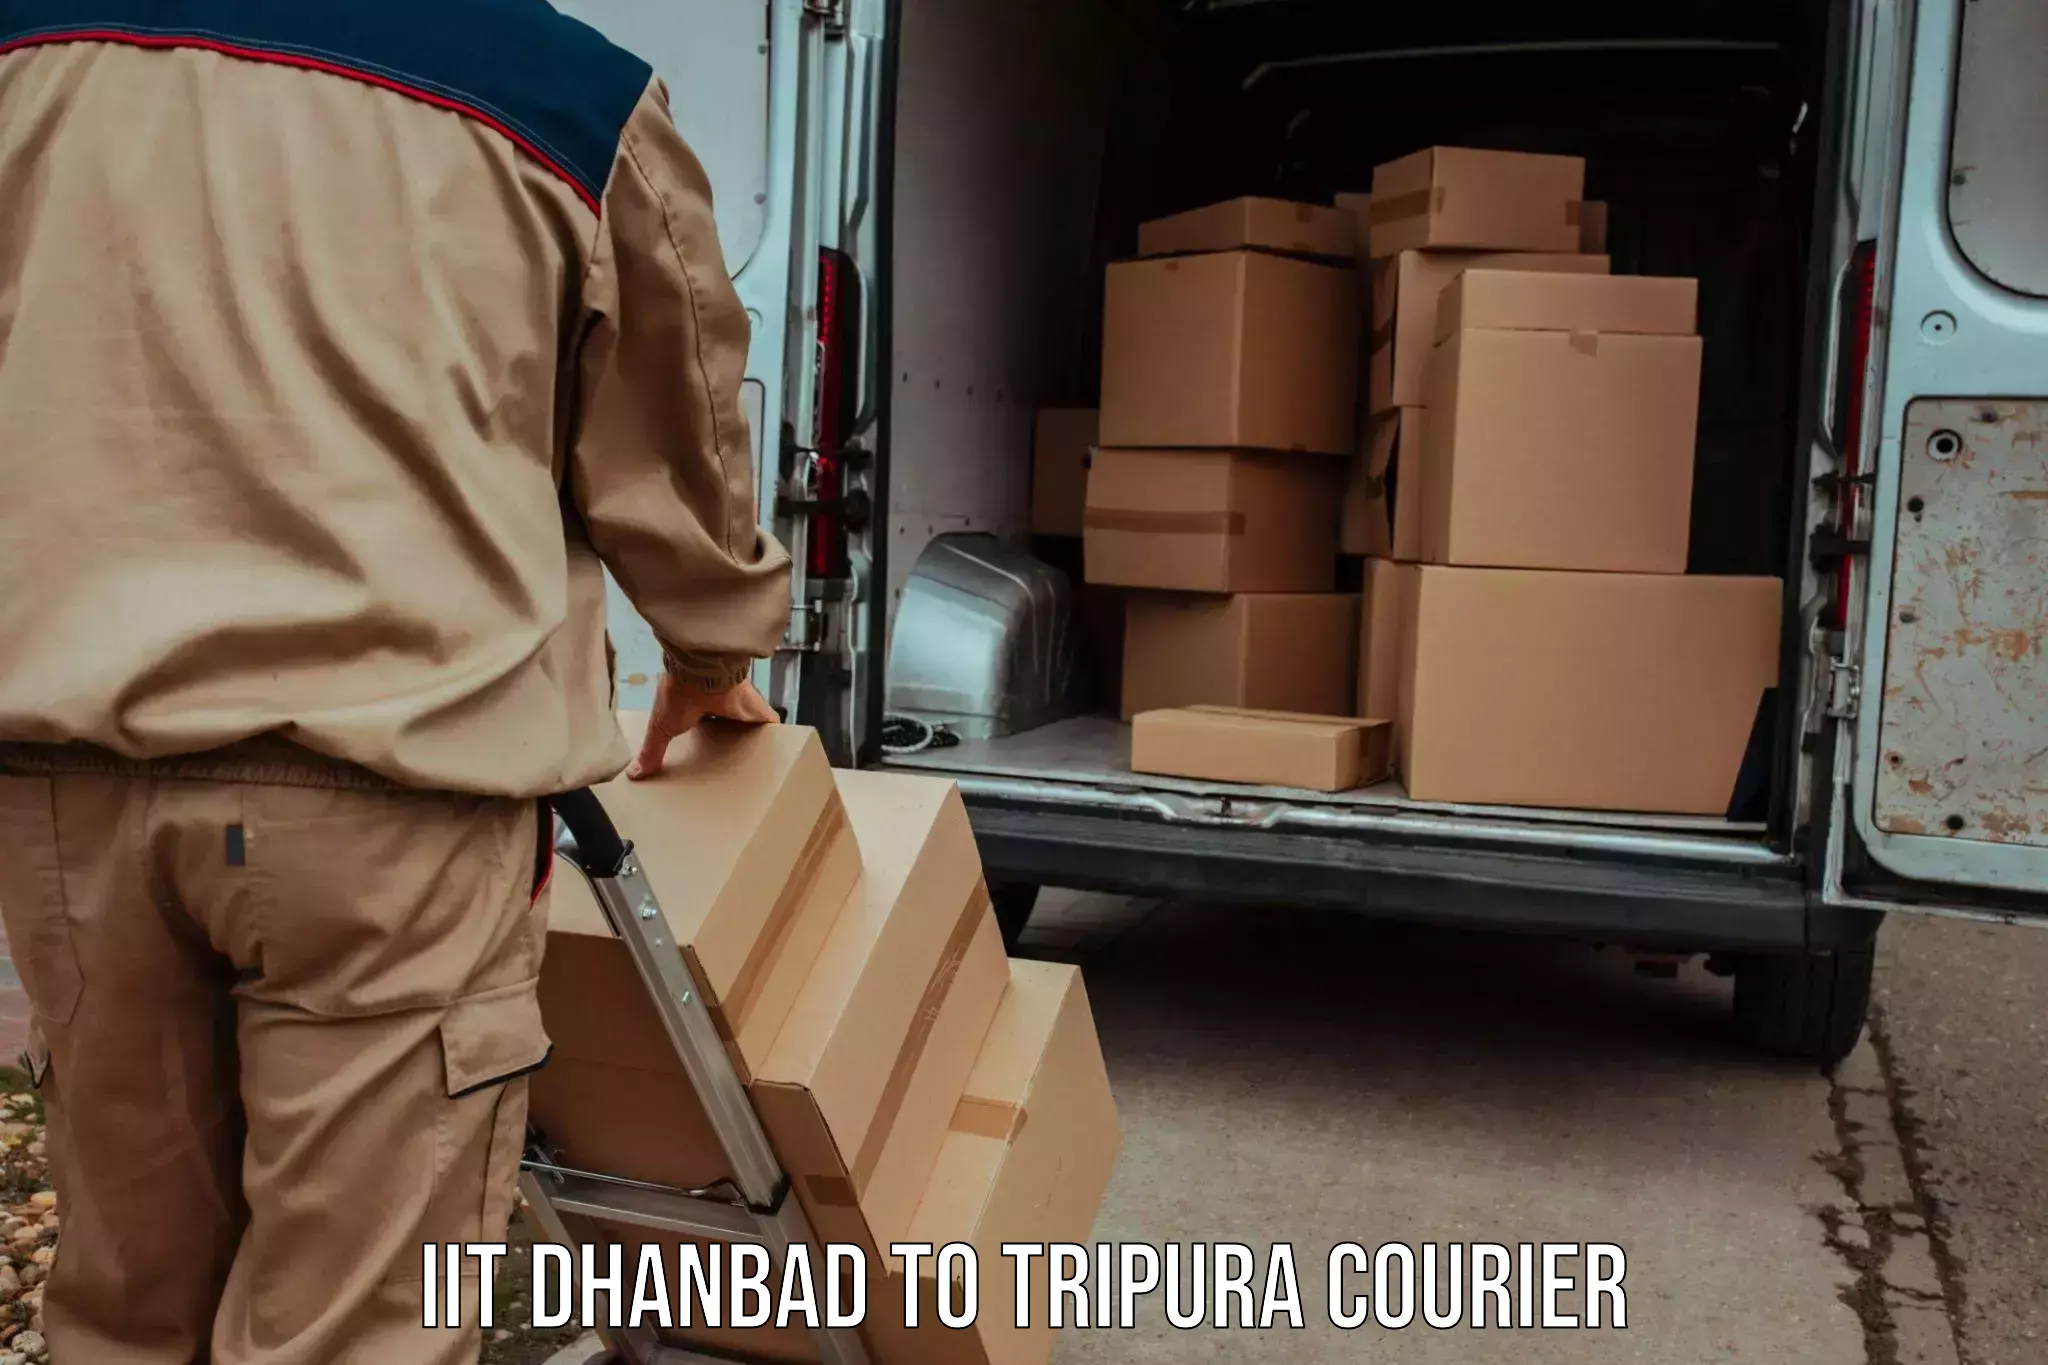 Affordable parcel service IIT Dhanbad to Agartala